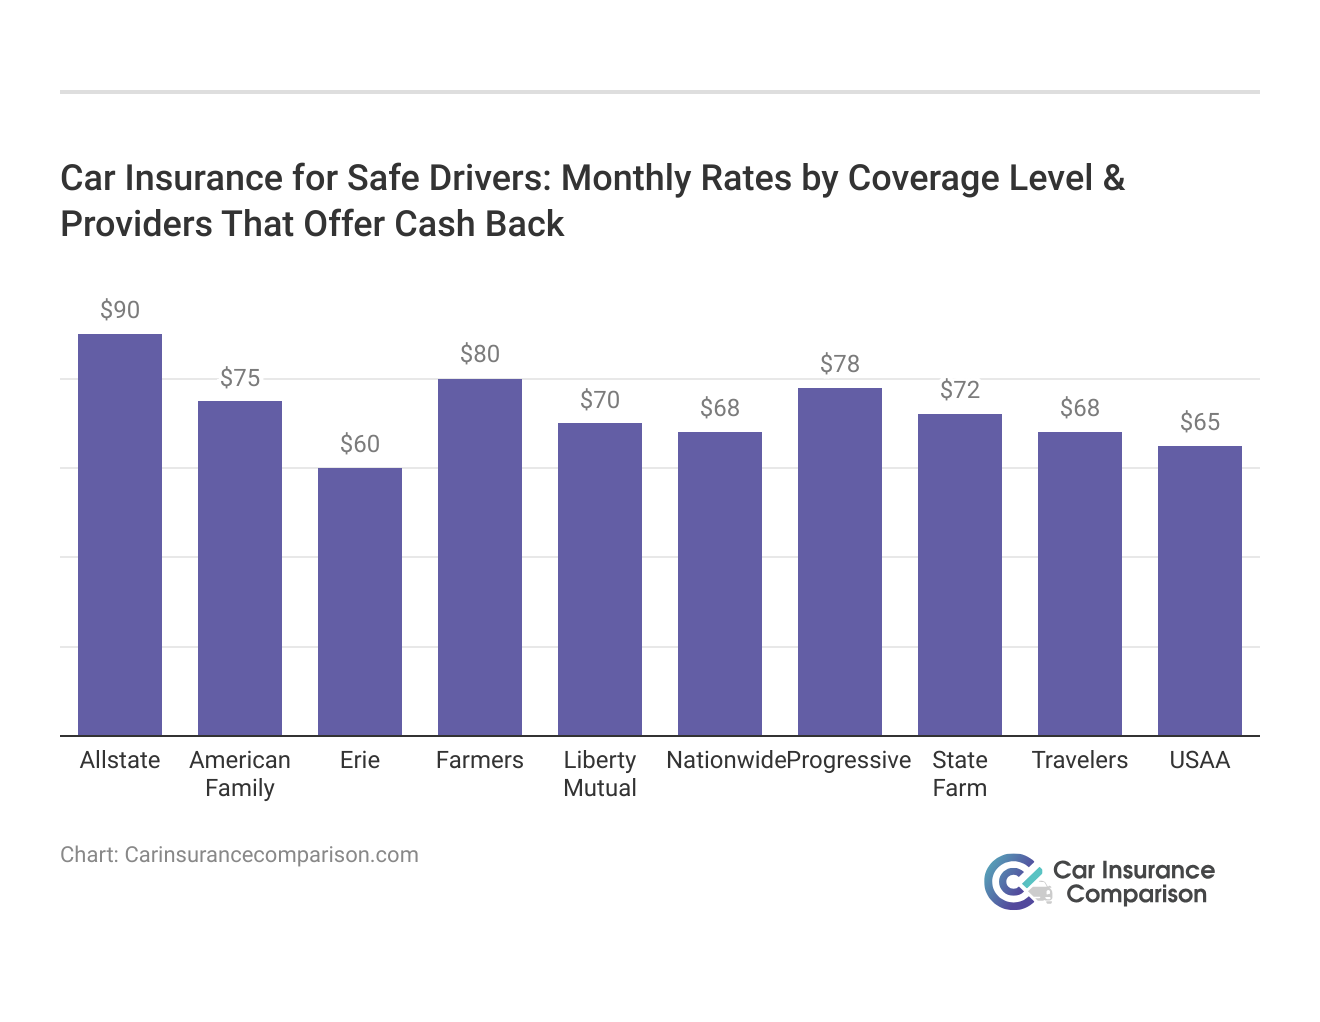 <h3>Car Insurance for Safe Drivers: Monthly Rates by Coverage Level & Providers That Offer Cash Back</h3>